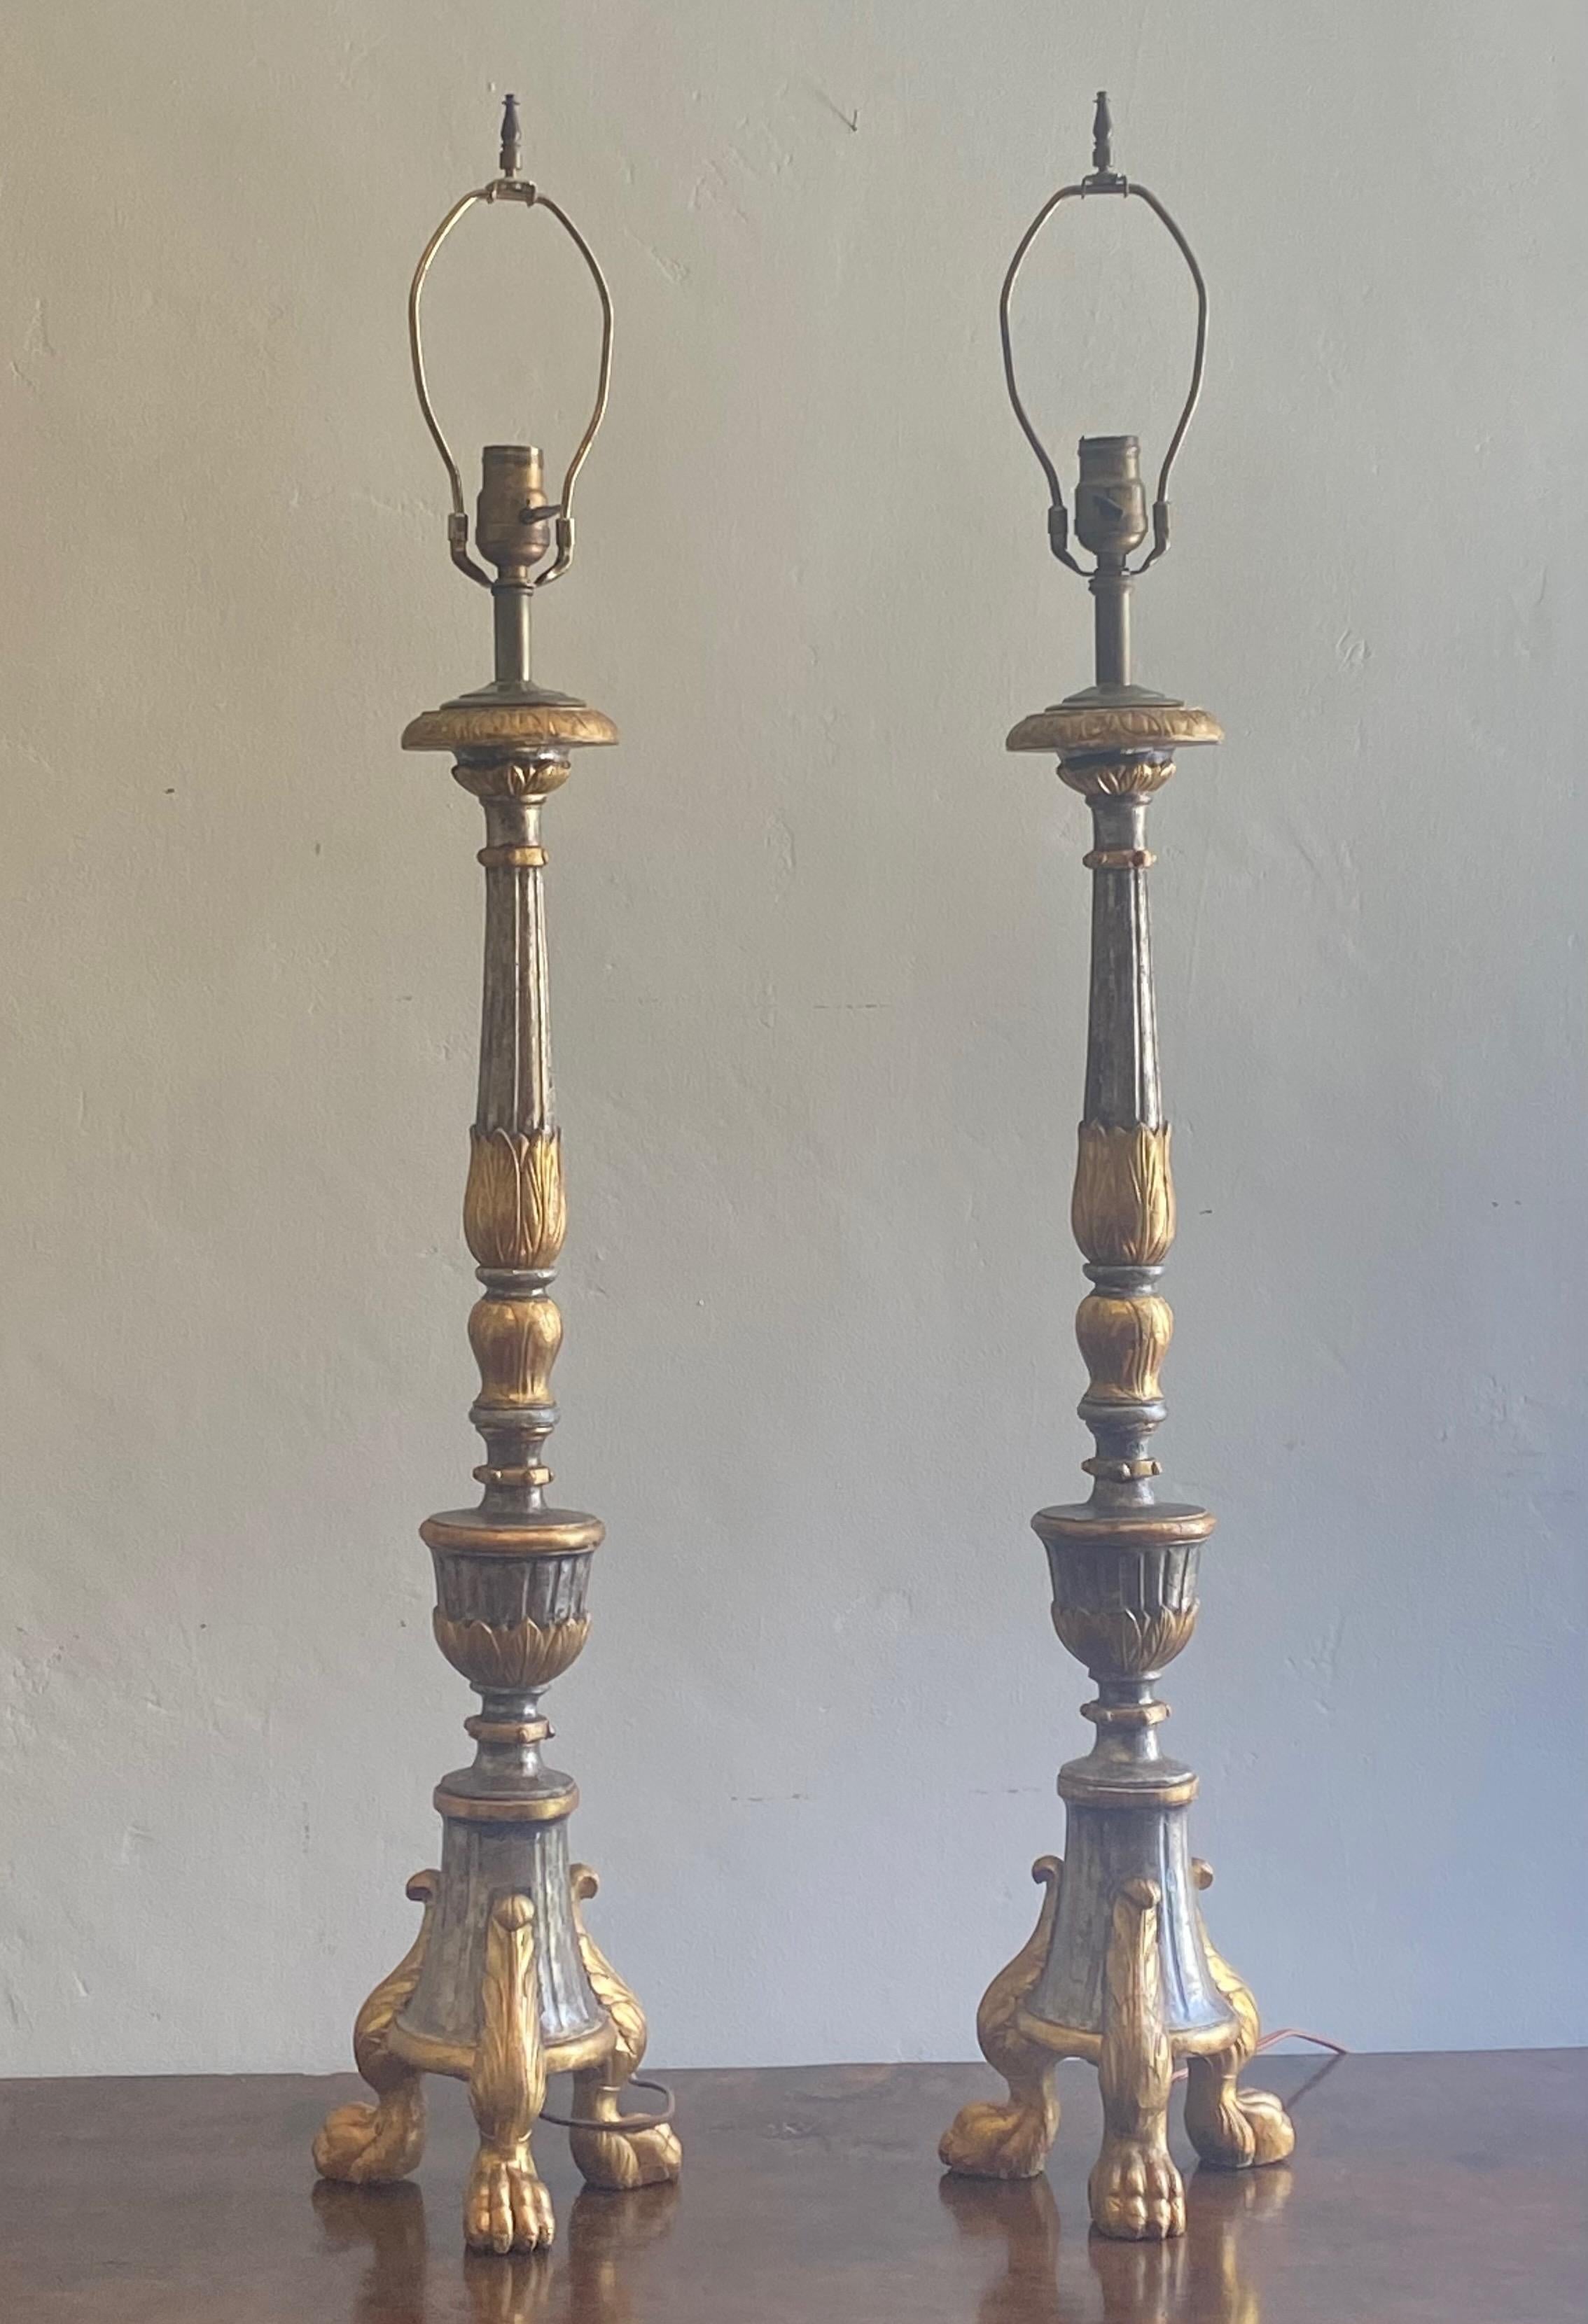 European Tall 18th Century Continental Silvered and Gilt Candle Stand Lamps